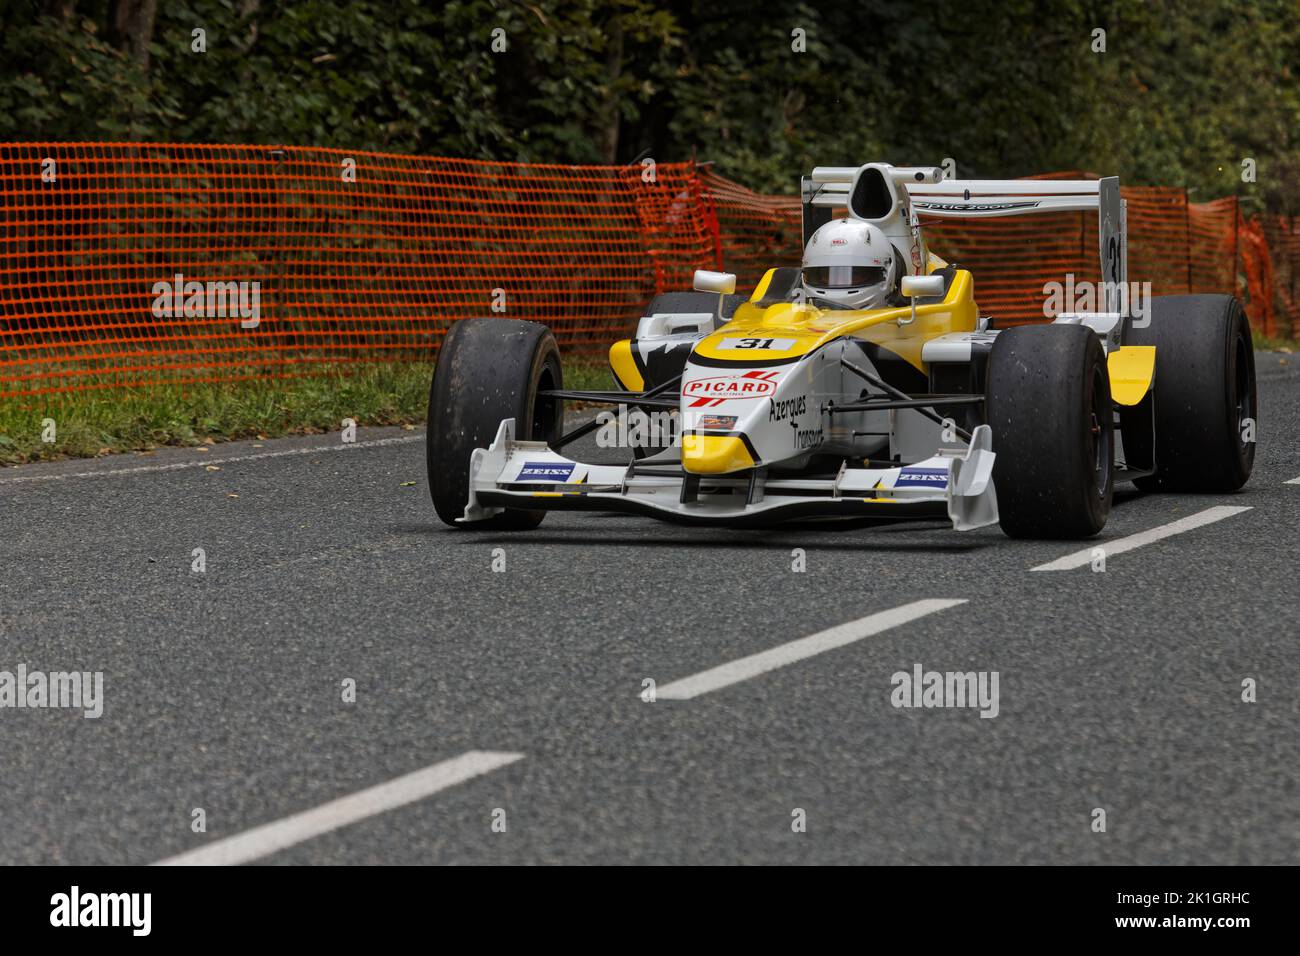 LIMONEST, FRANCE, September 17, 2022 : Racing Car drives slowly on an open road to the paddock of the annual uphill car race. Stock Photo